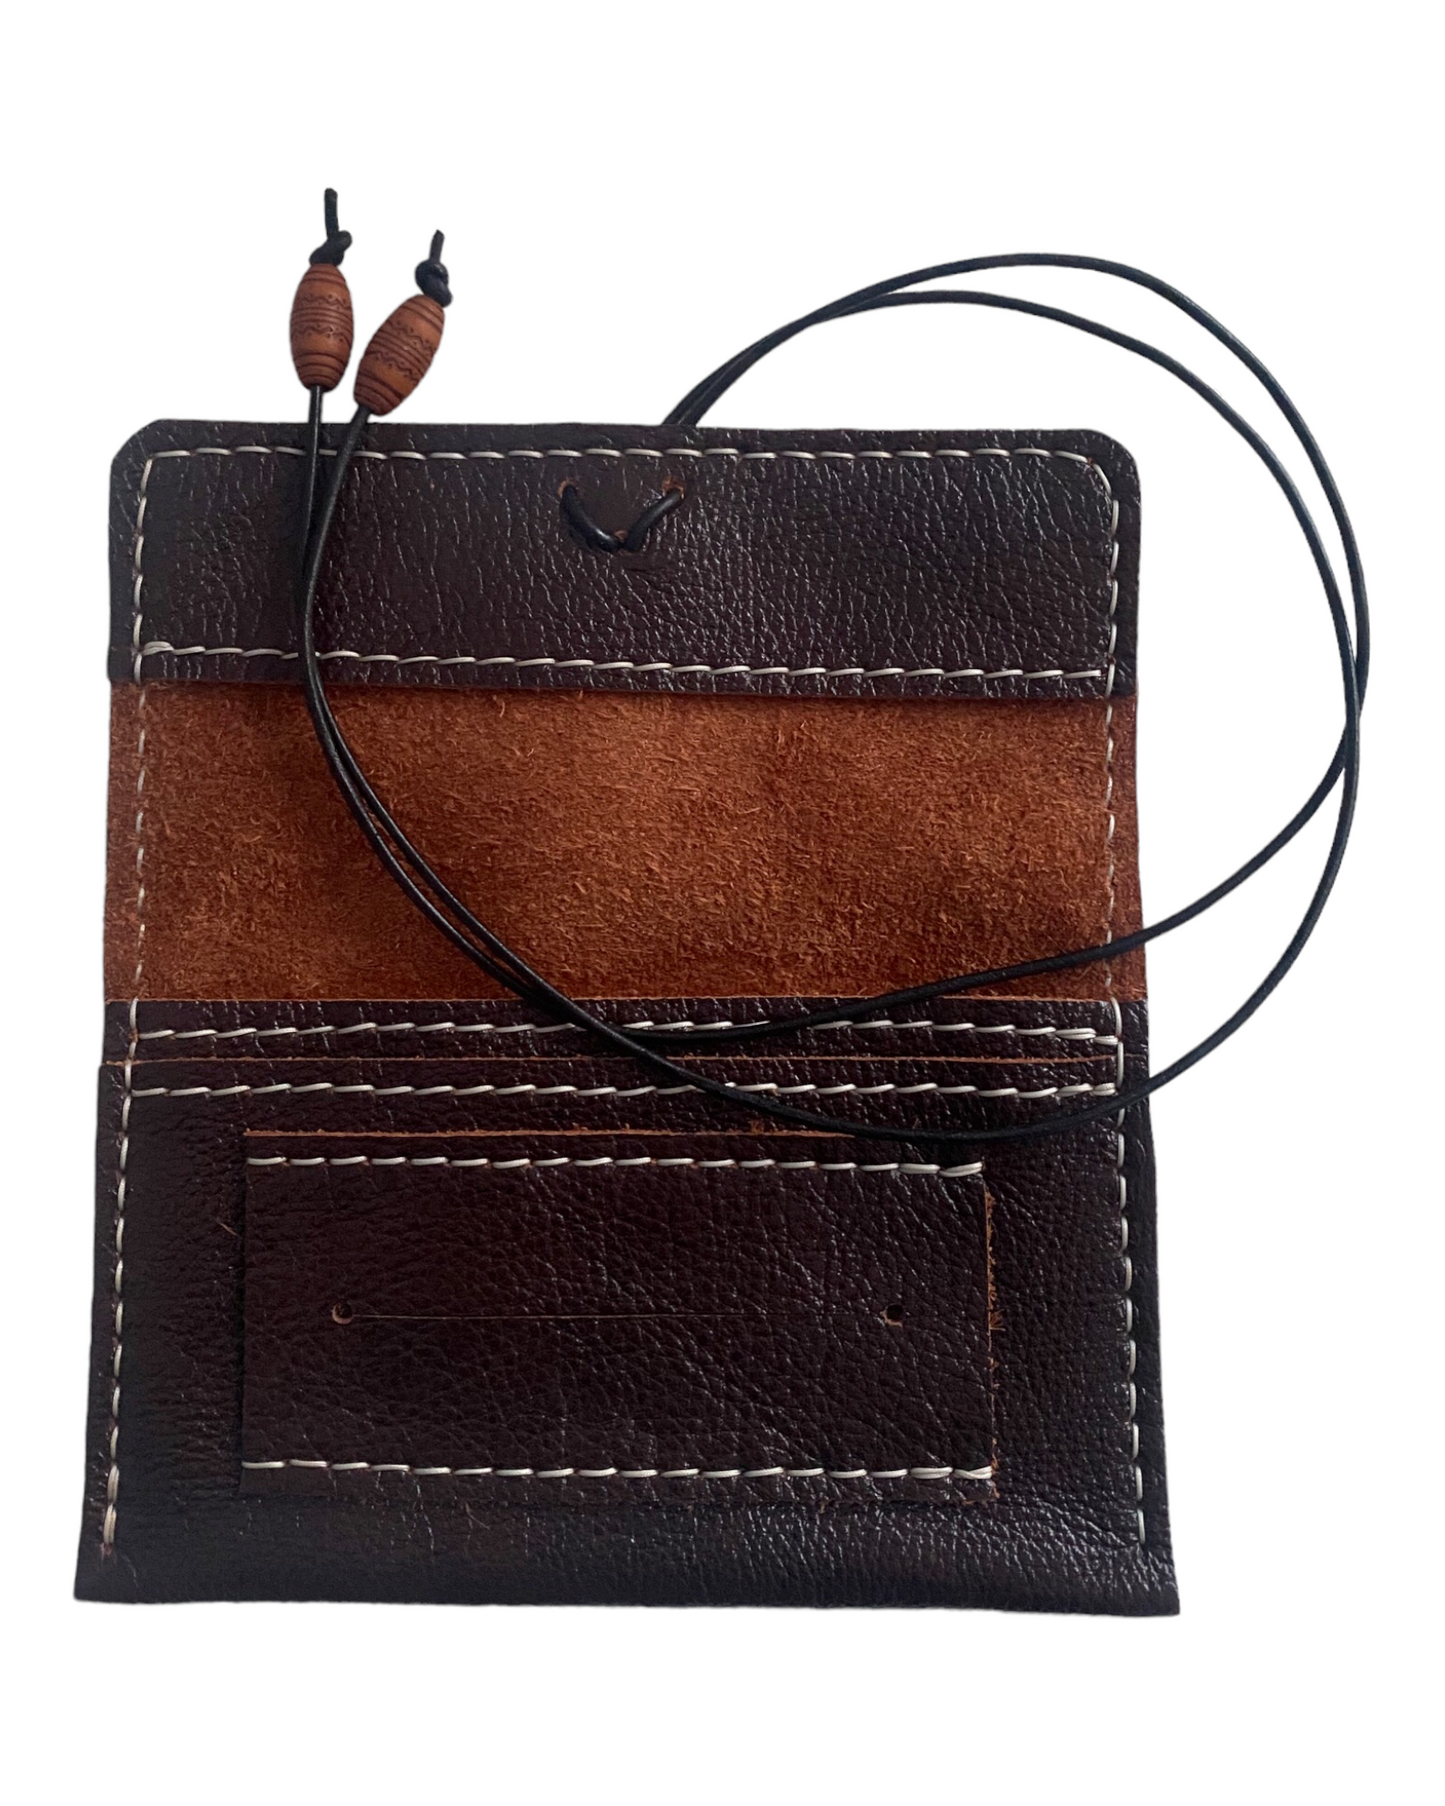 Handmade Leather Tobacco Pouch 30g